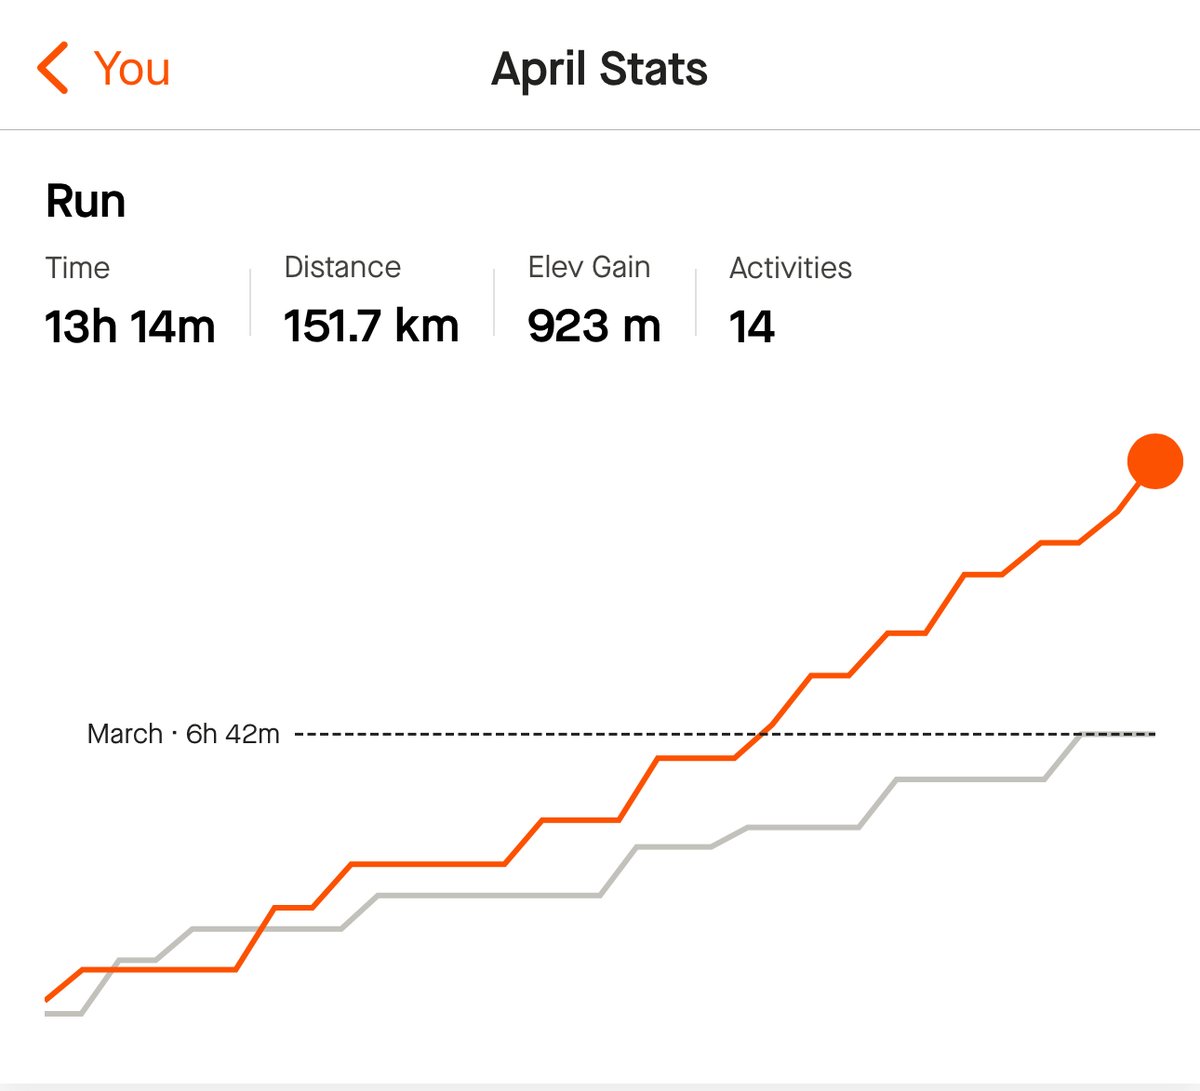 Five weeks to go until the Stockholm marathon. Stepping up the training